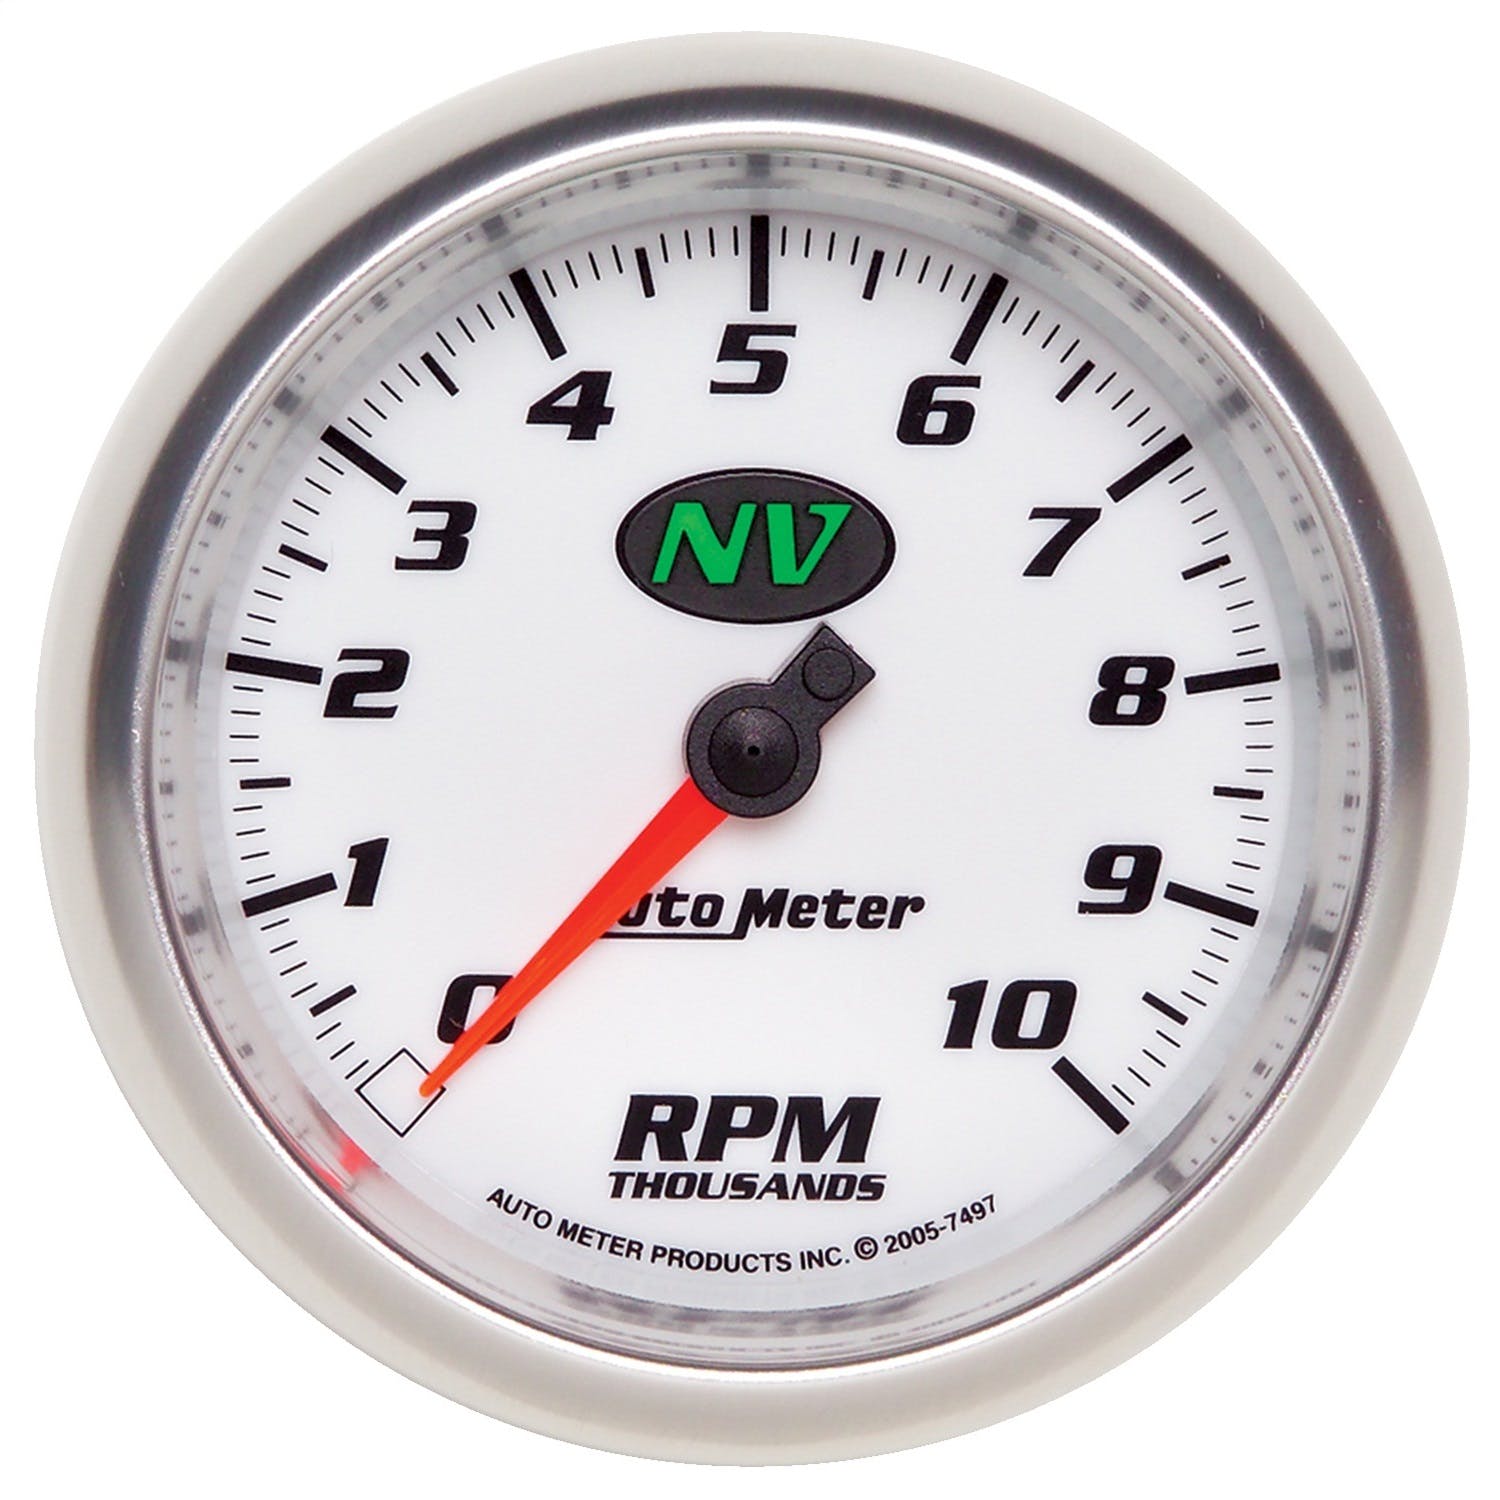 AutoMeter Products 7497 In-Dash Tach 10 000 Rpm